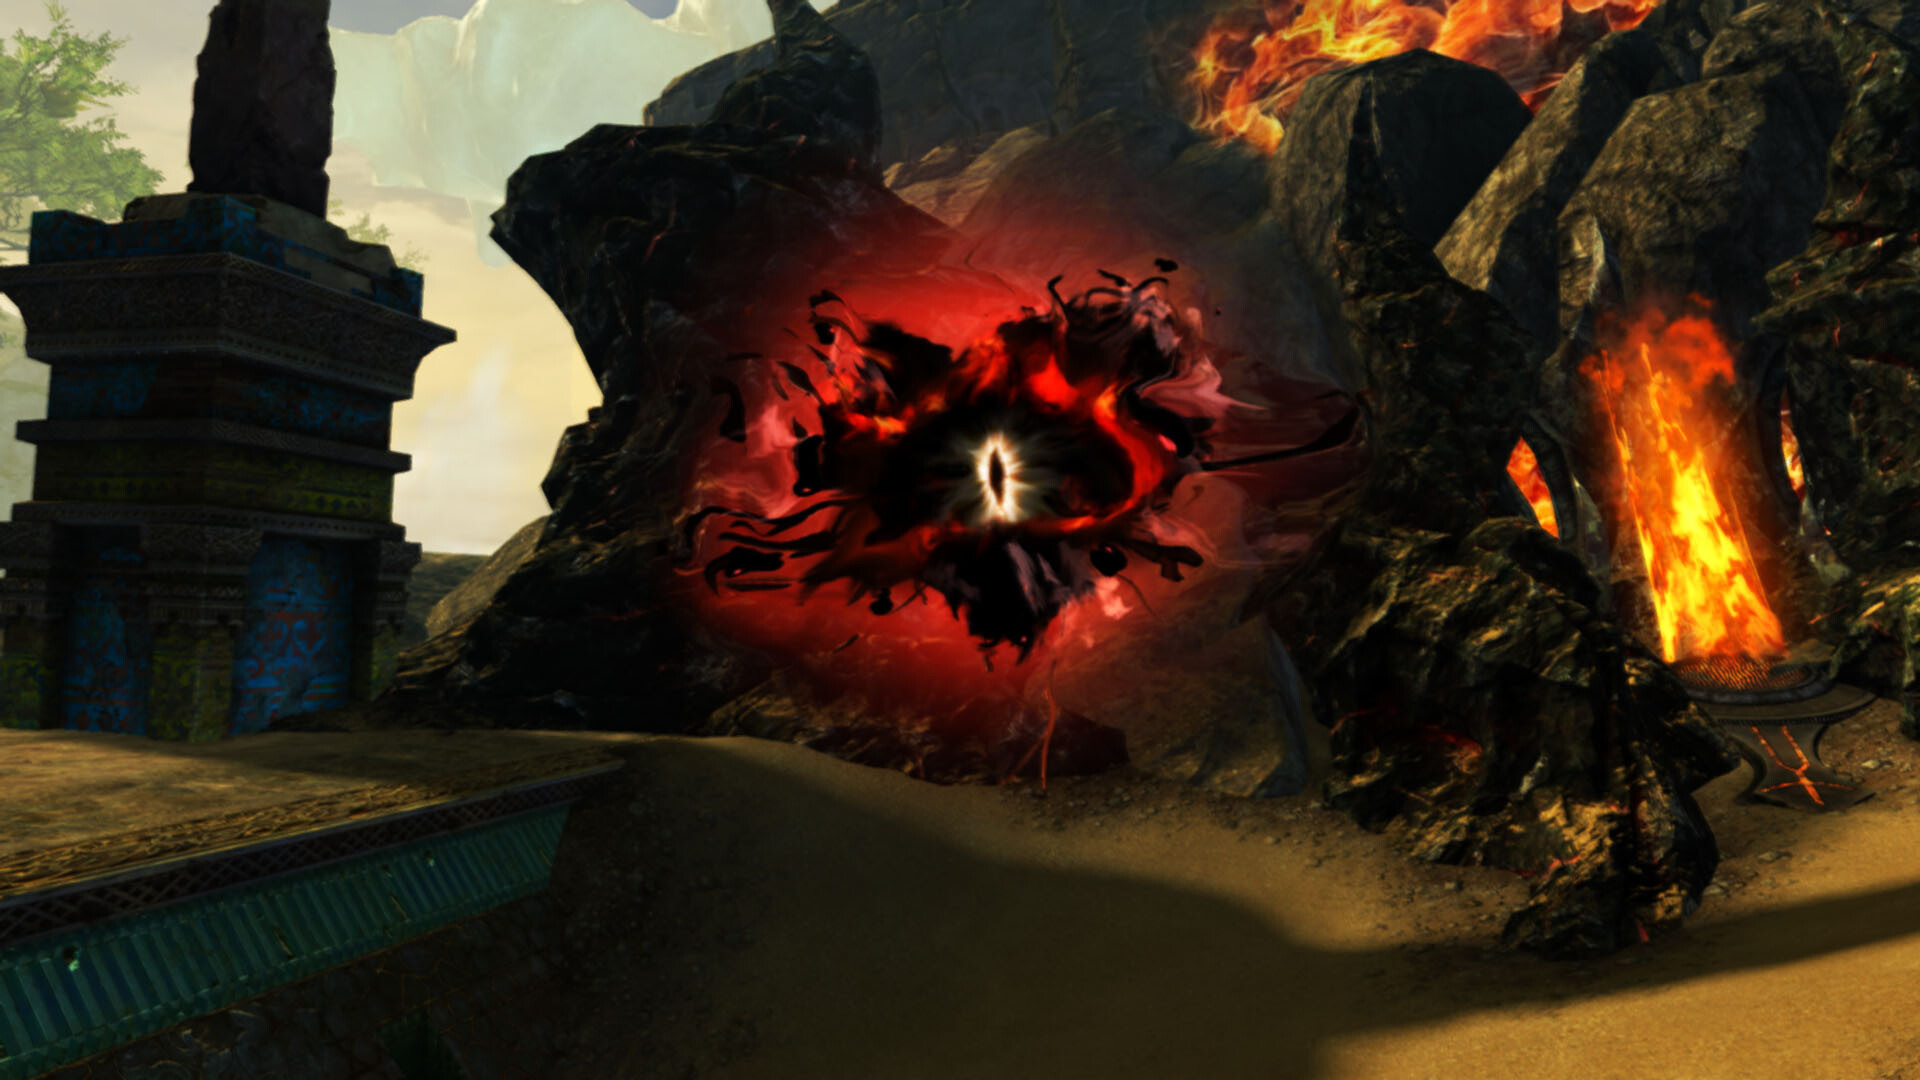 Guild Wars 2 formally announces fourth expansion, Secrets of the